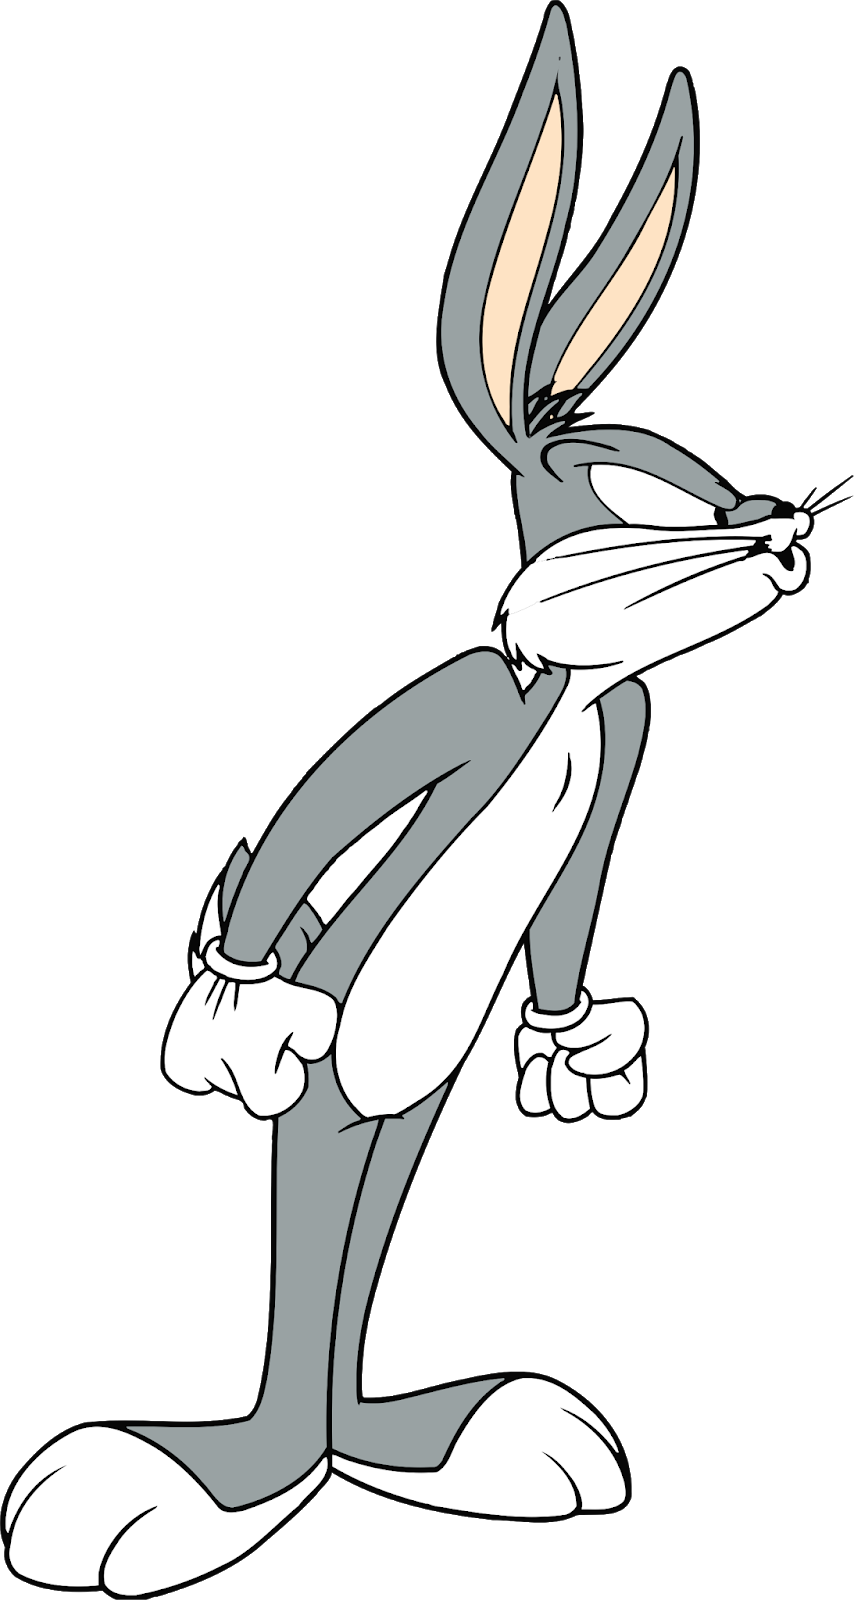 Download PNG image - Bugs Bunny Cartoon PNG Free Download 